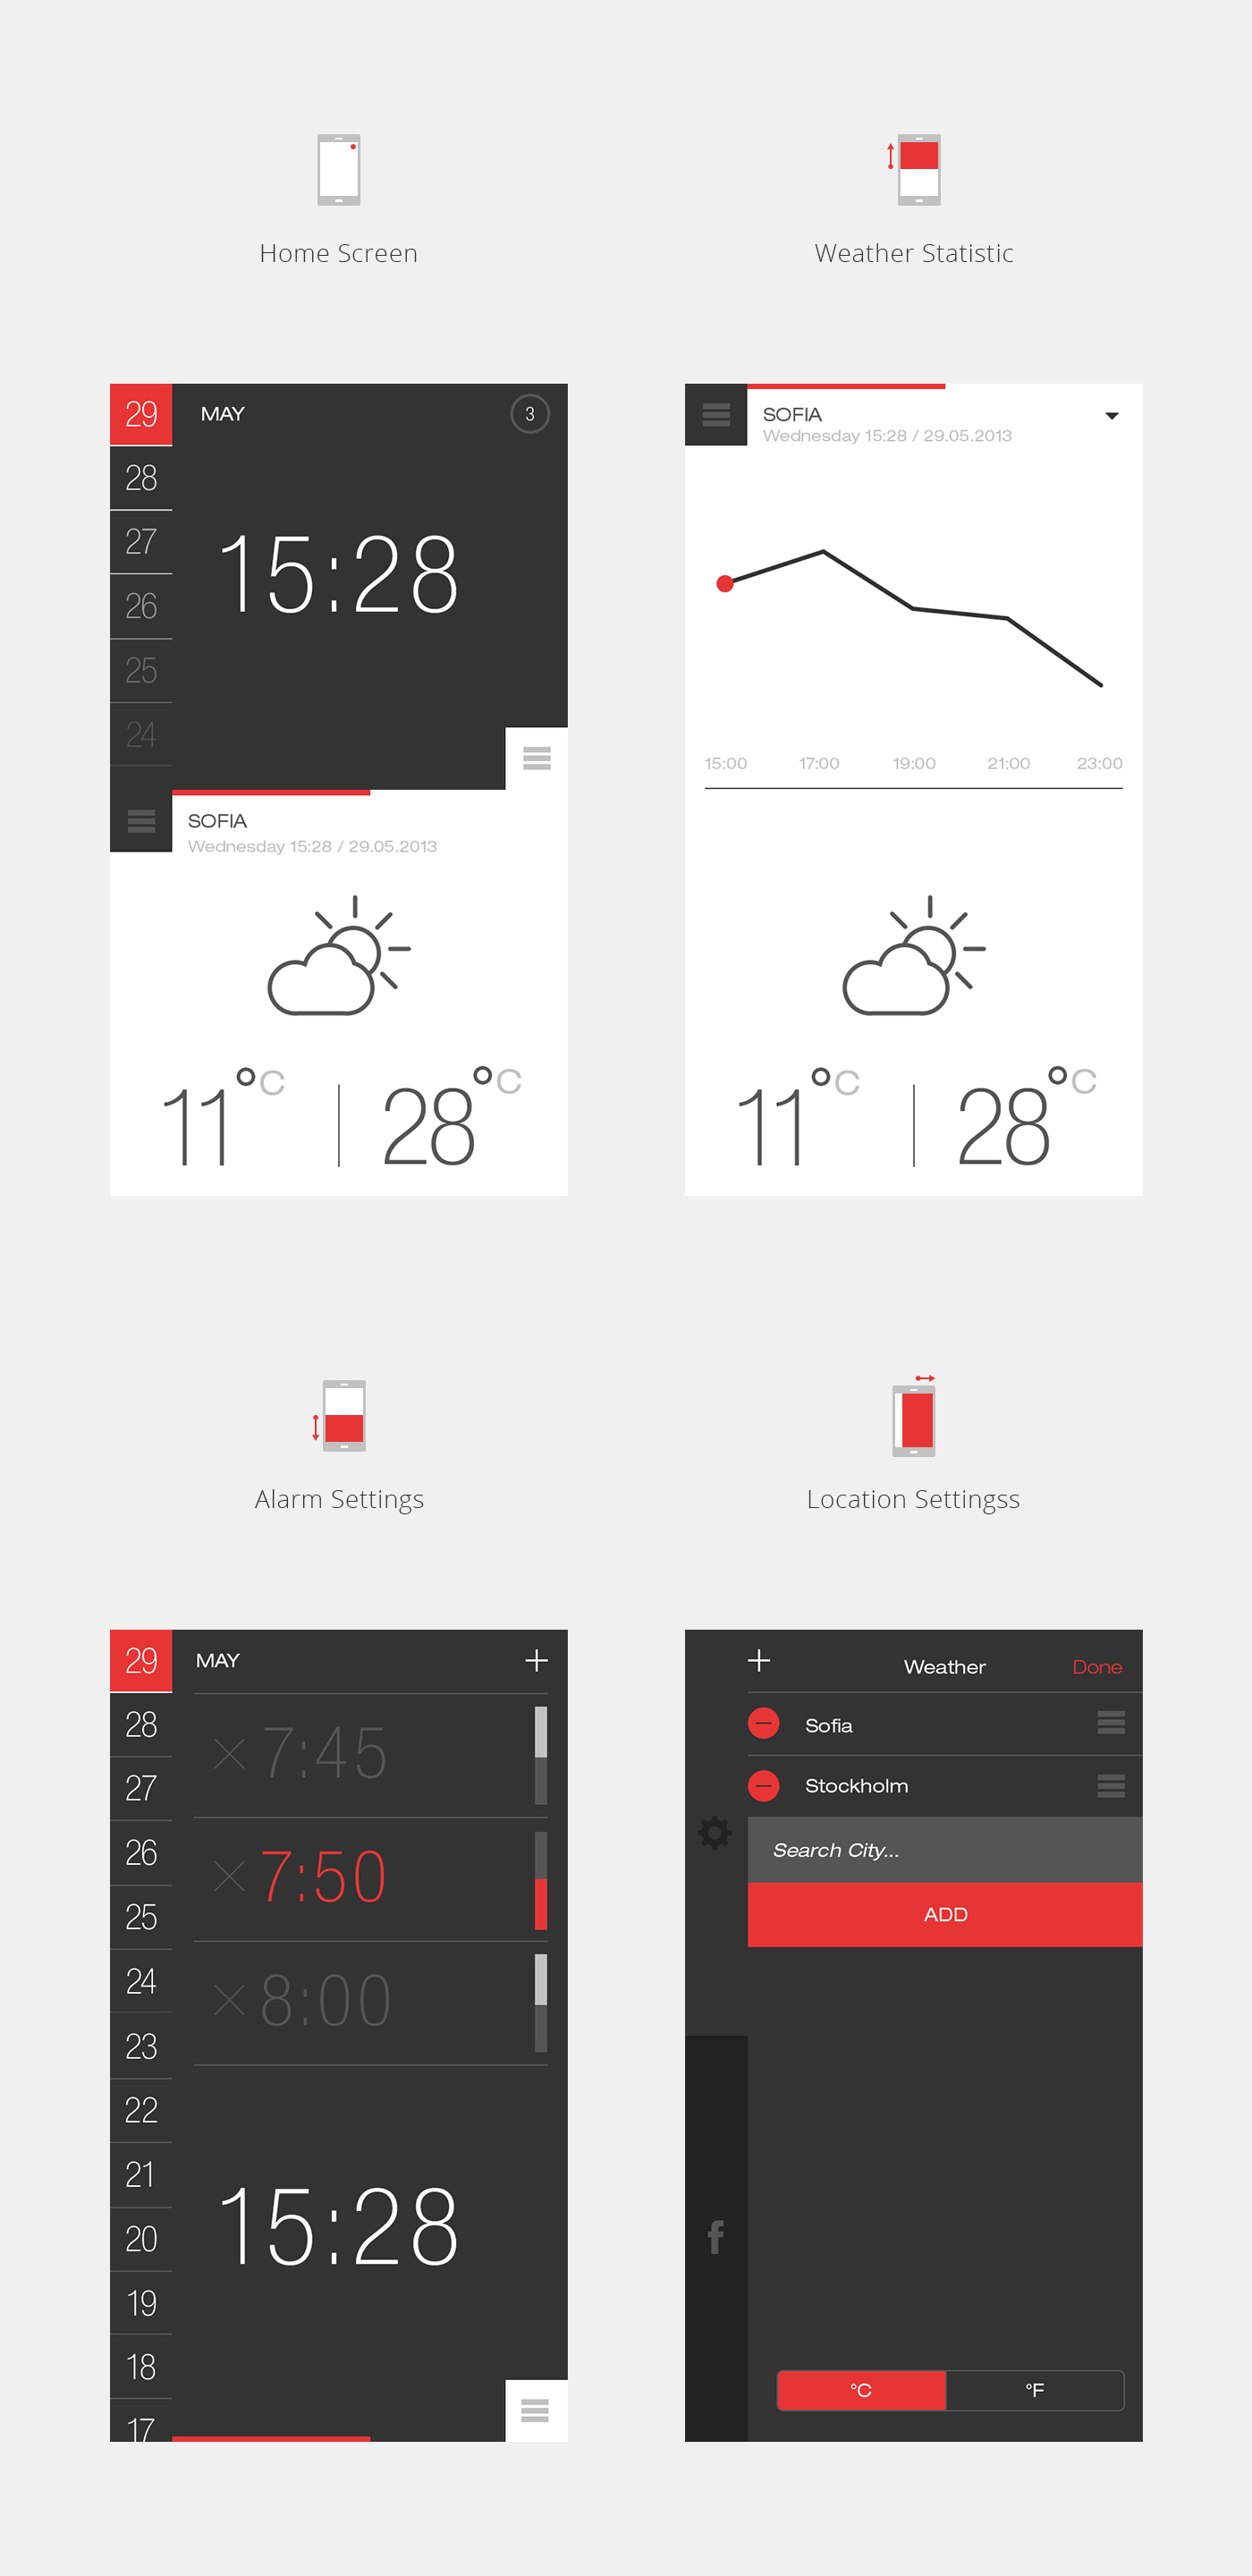 programing page landing weather time app UI windows download free application Weather&Time user clean